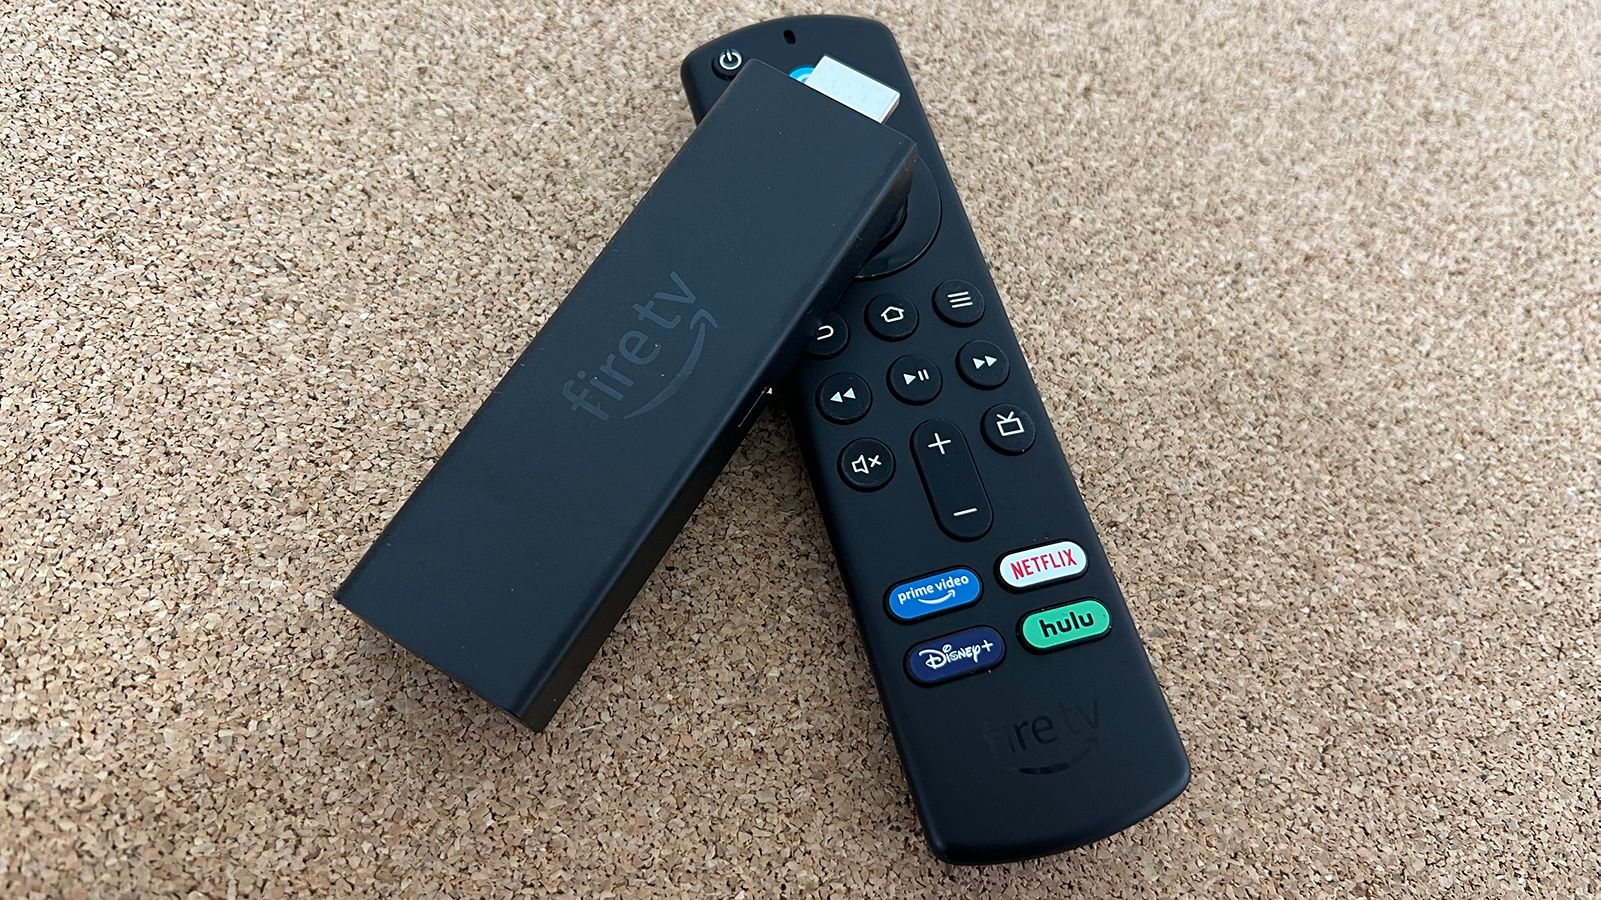 Fire Tv Stick 4k Max - Uelectronica